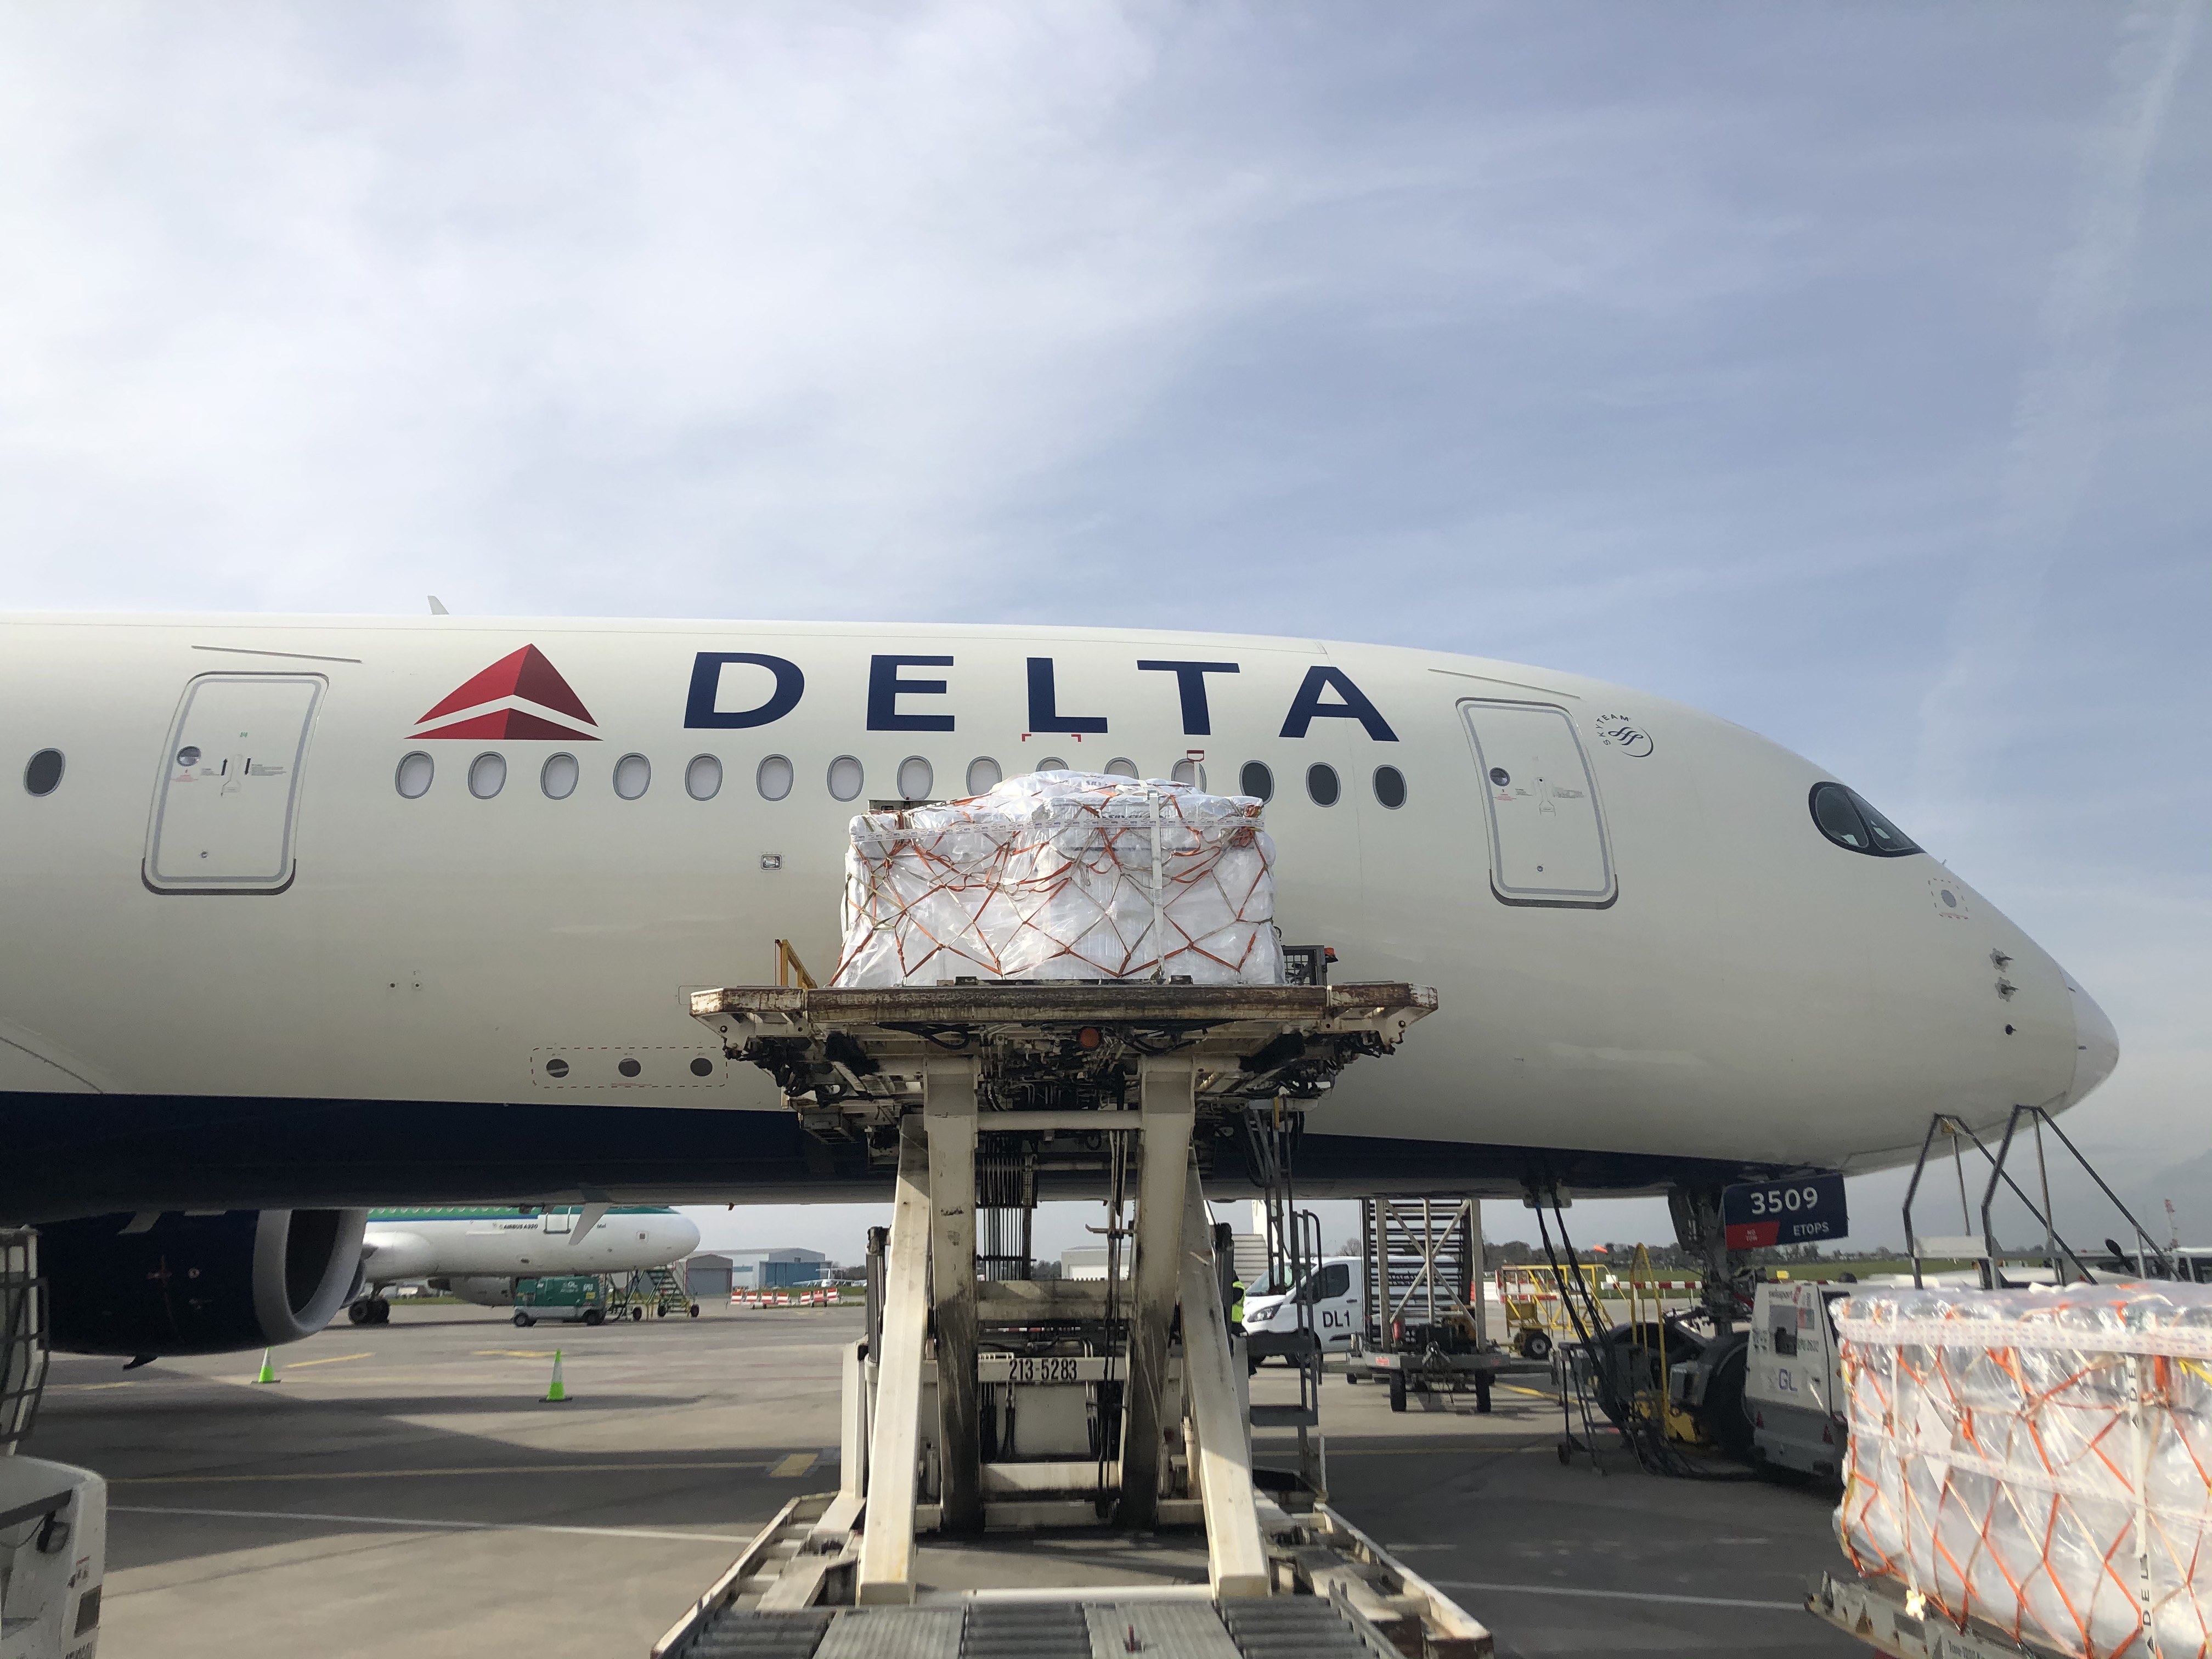 Delta Cargo charter operations keep global commerce moving